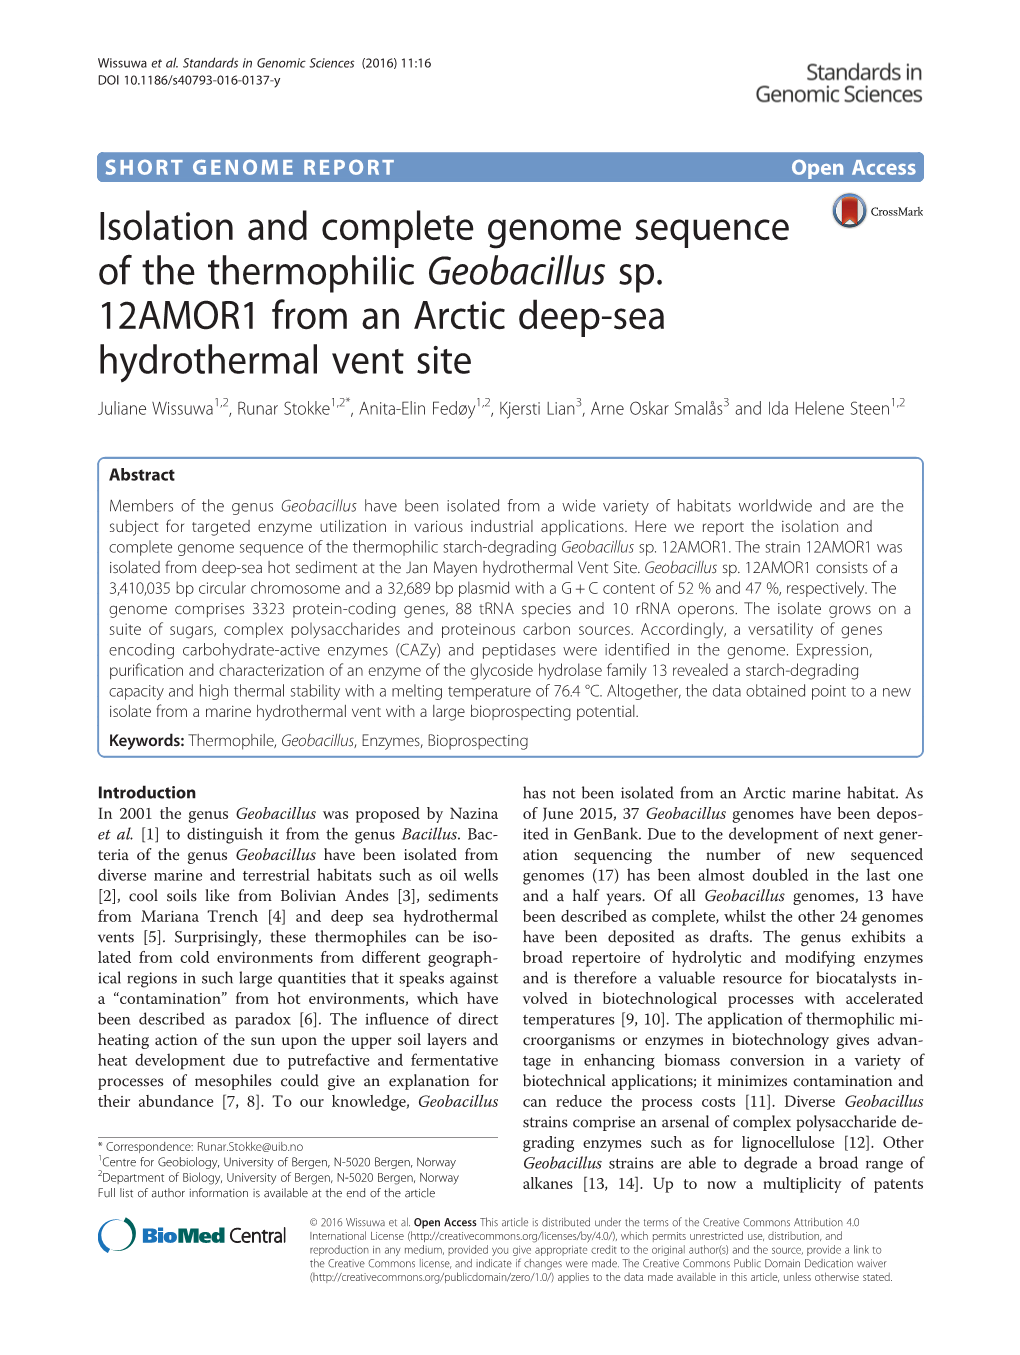 Isolation and Complete Genome Sequence of the Thermophilic Geobacillus Sp